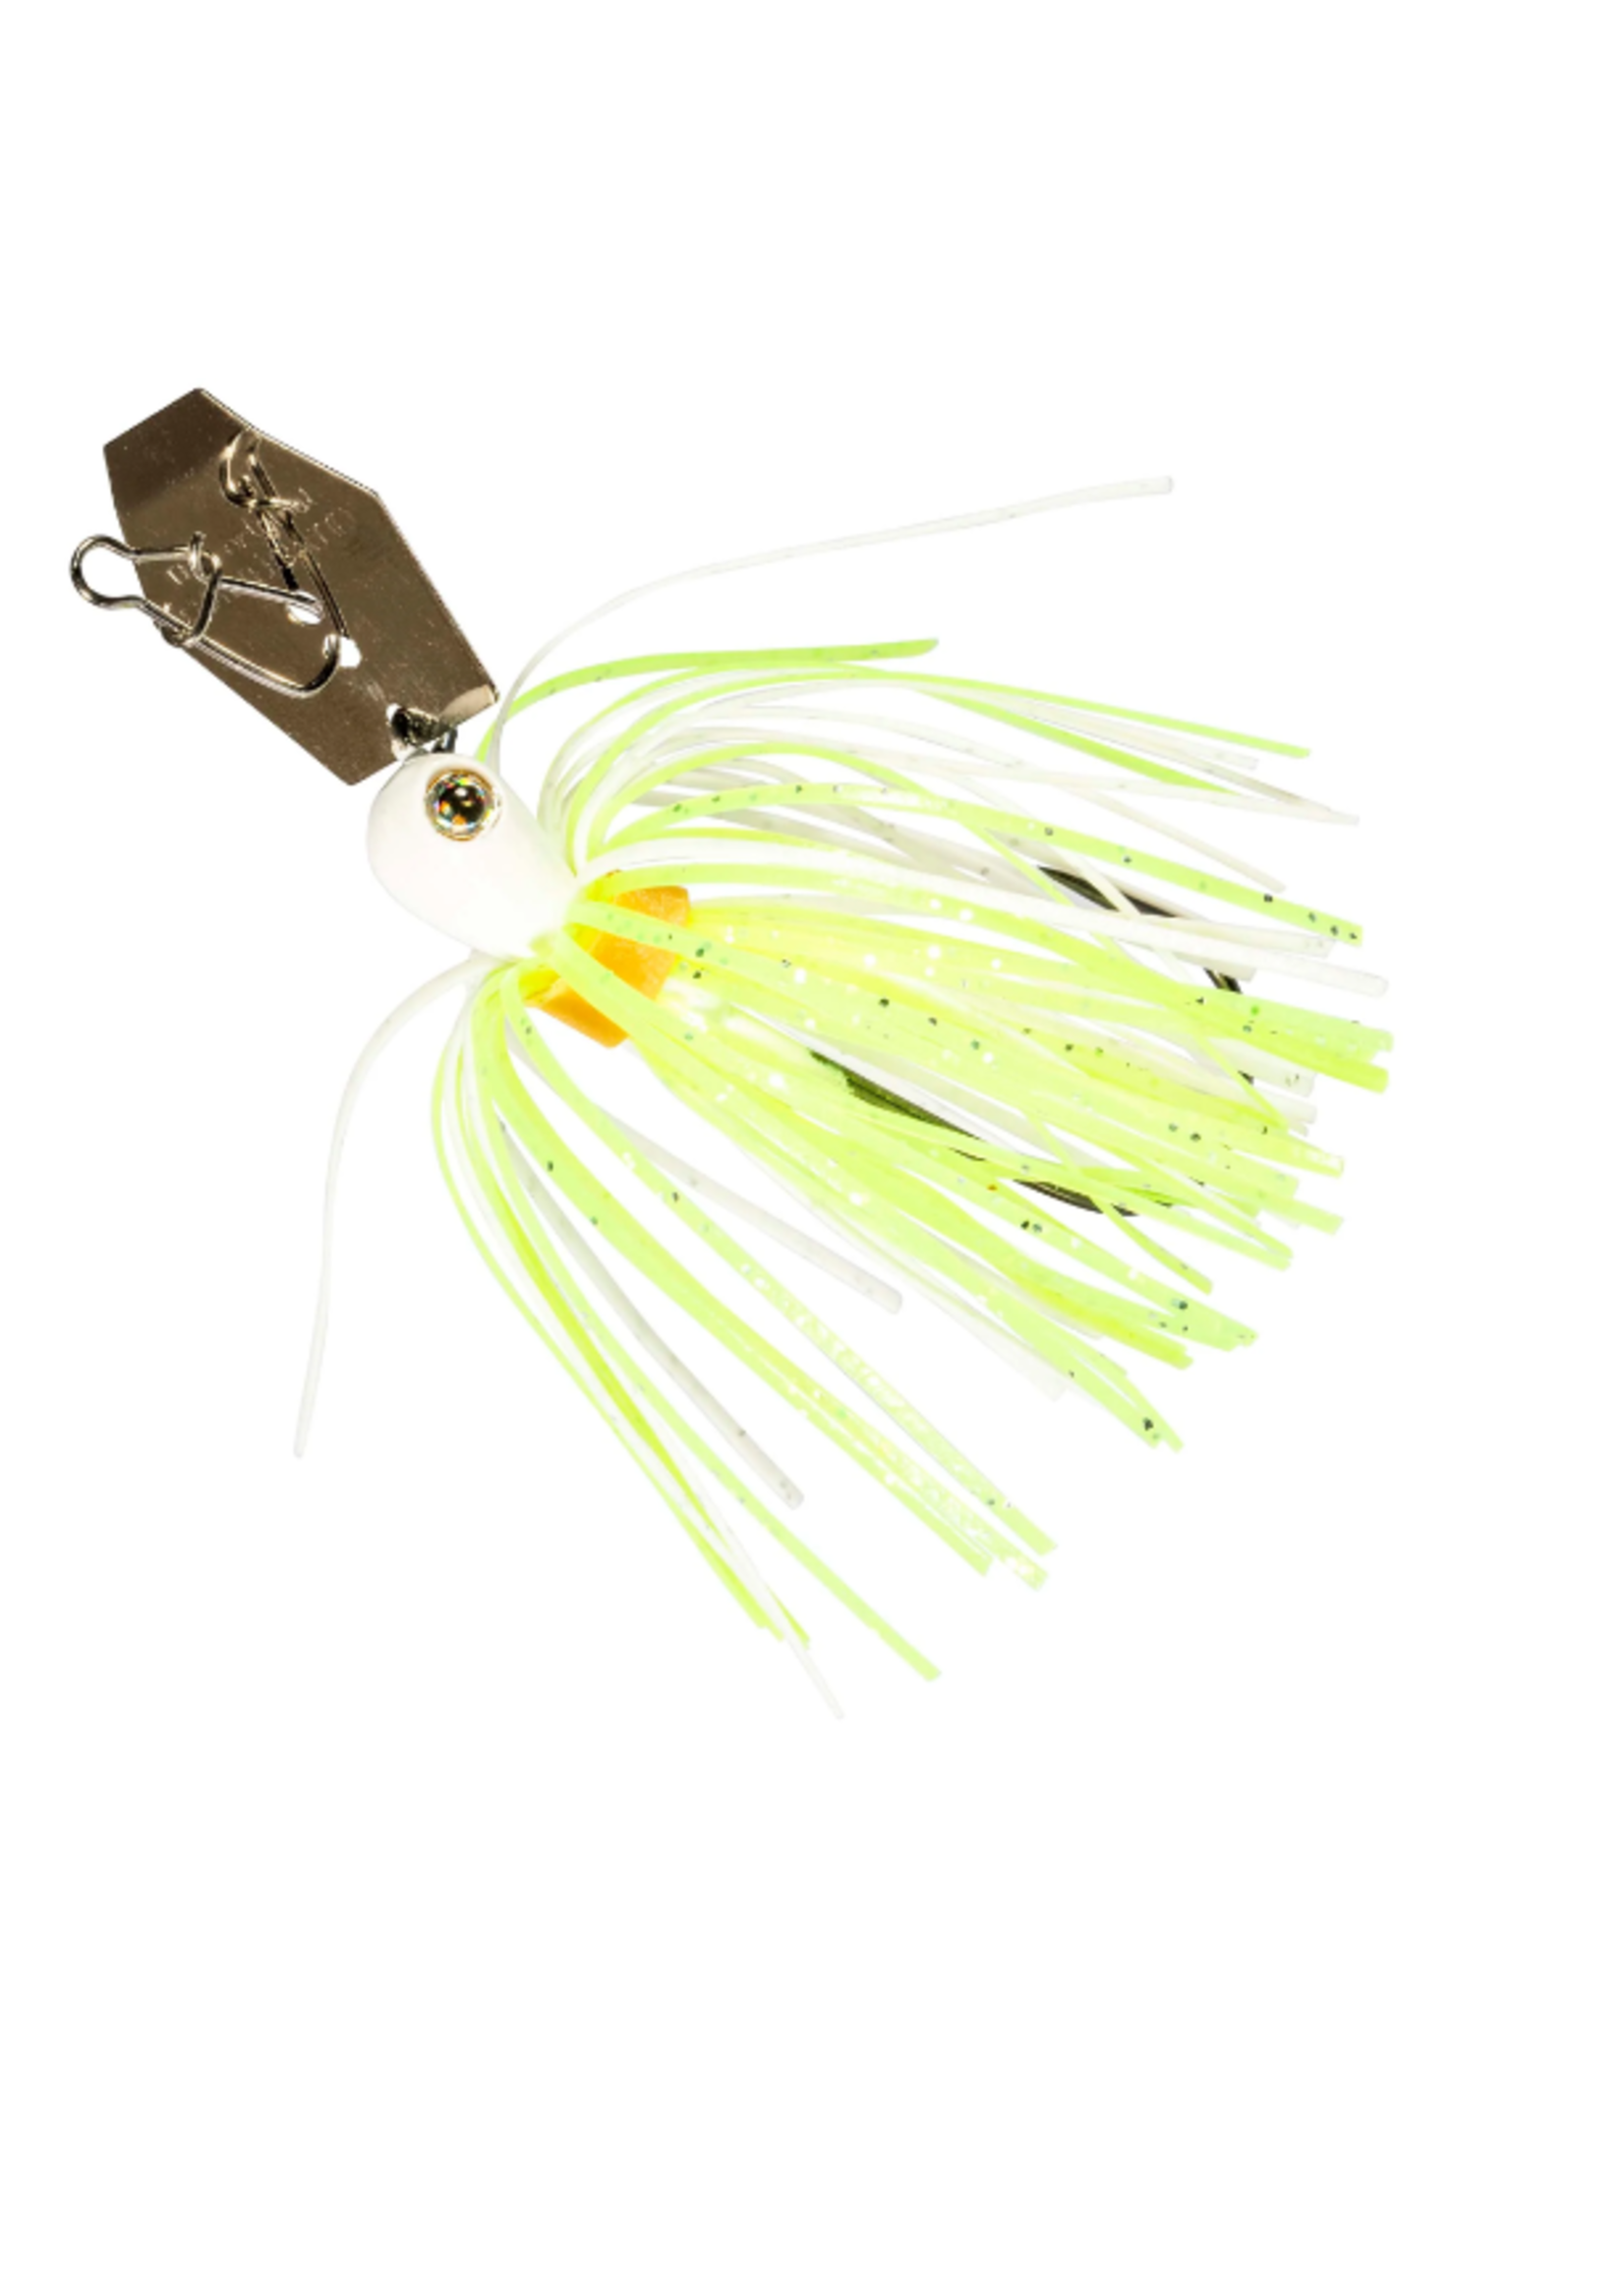 ChatterBait® Micro